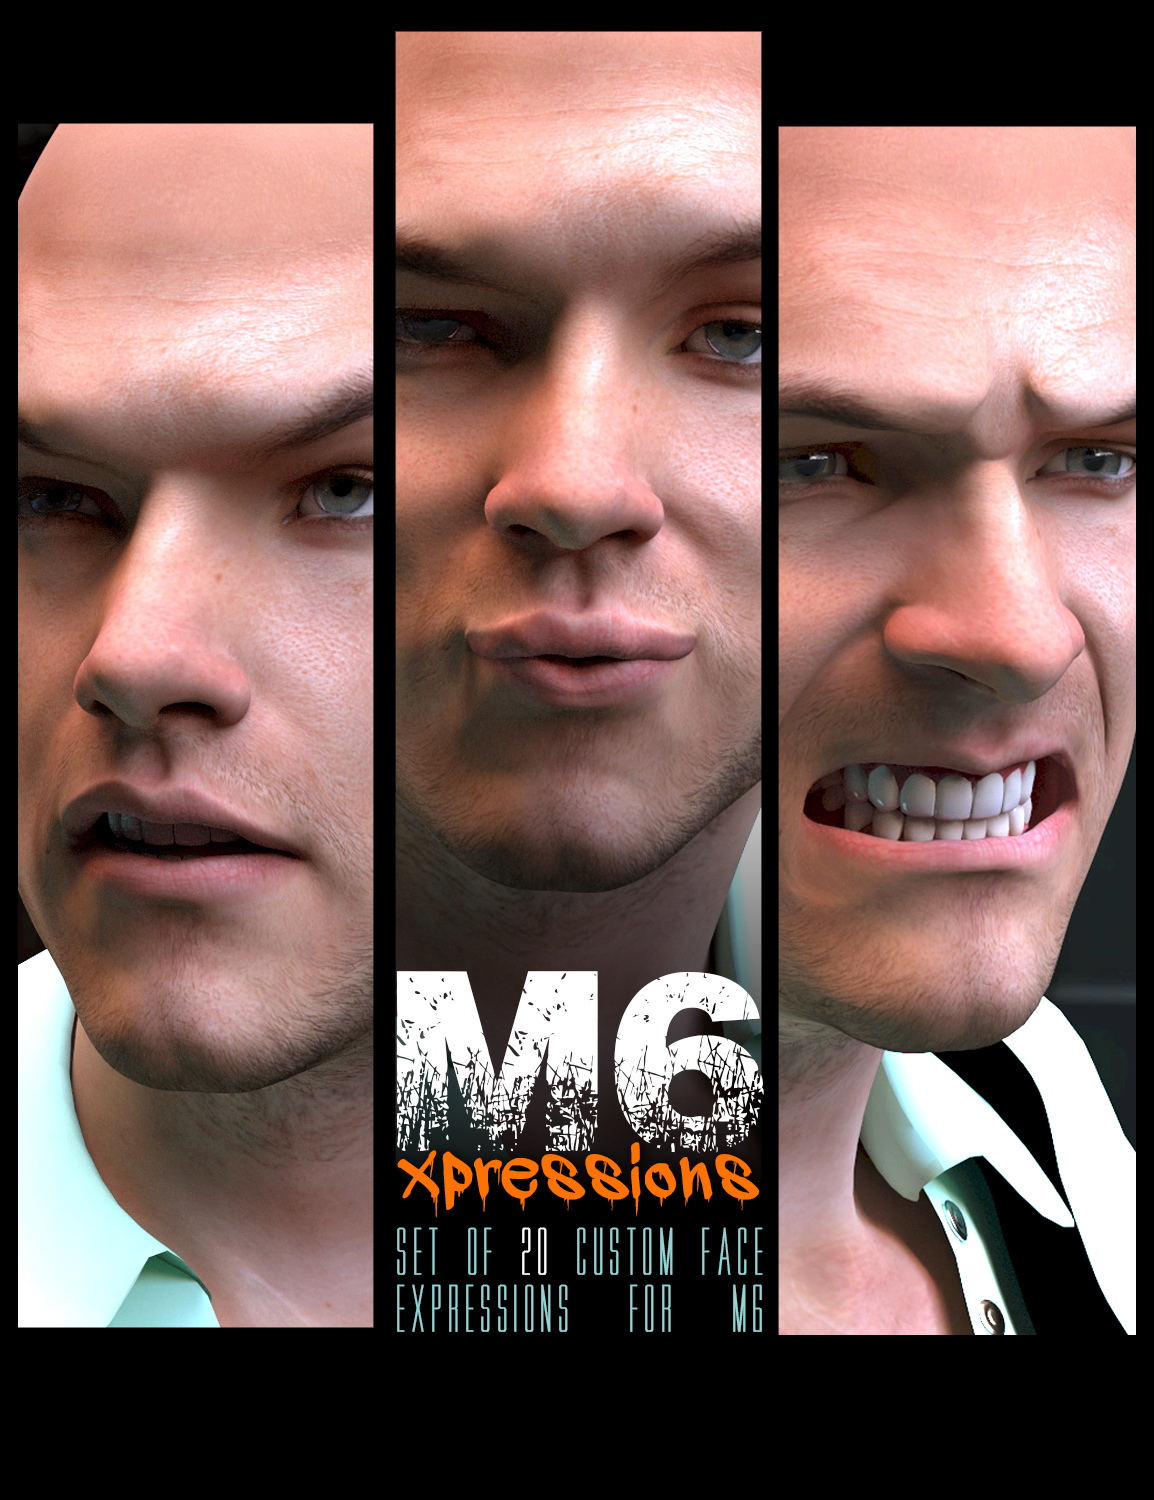 M6 Xpressions by: Cake One, 3D Models by Daz 3D